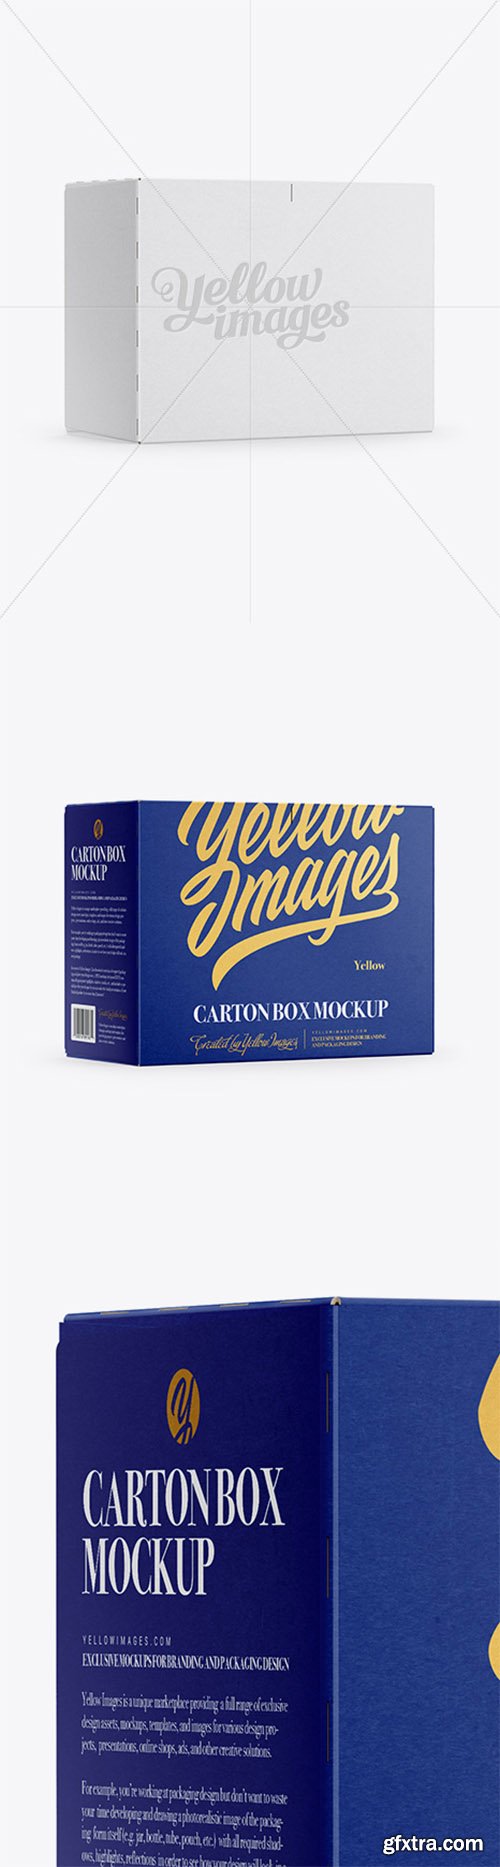 Cans Paper Package Mockup - Half Side View 18642